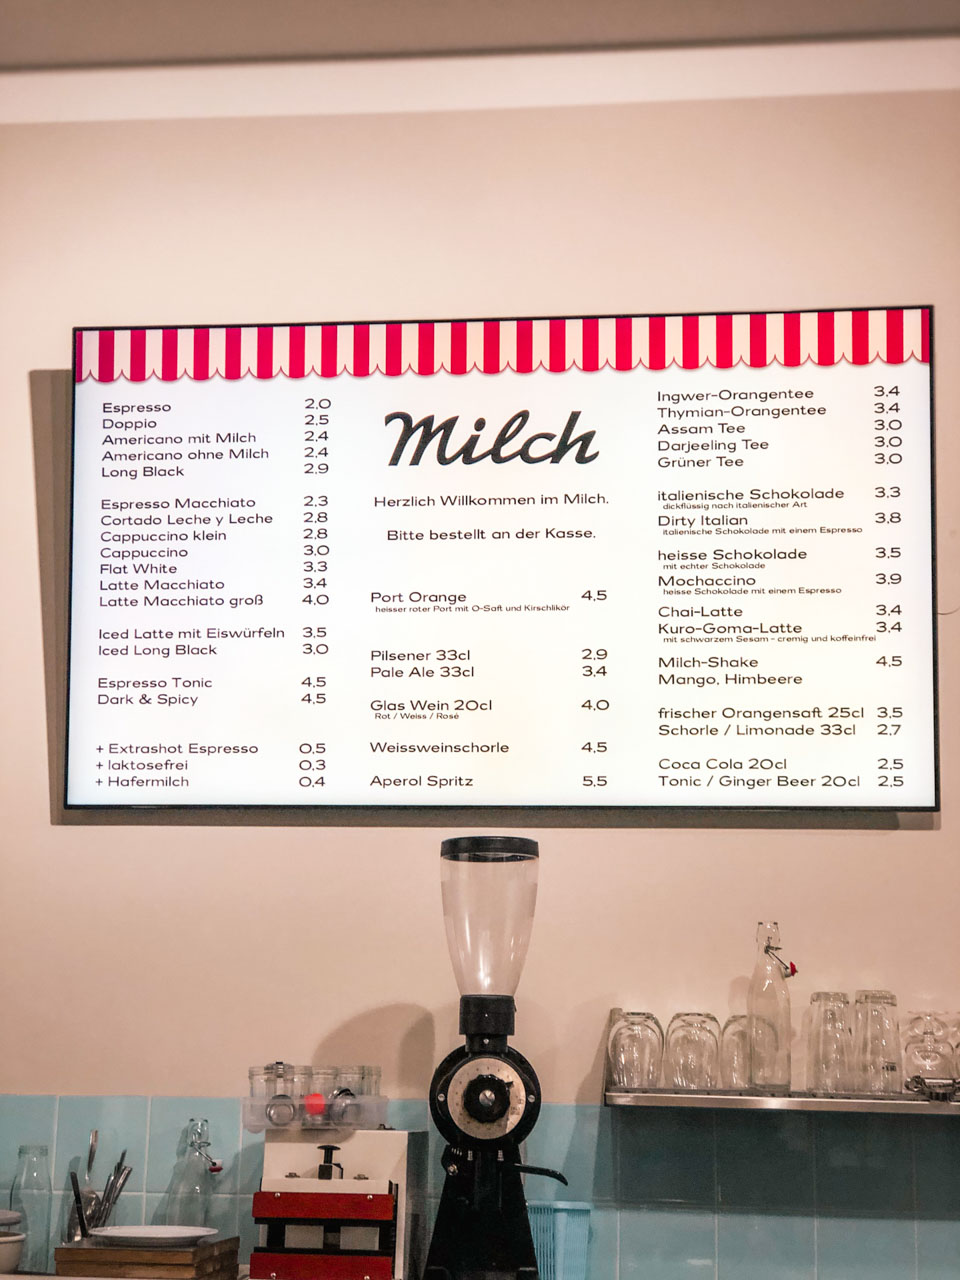 Menu on the wall of Milch café in Hamburg